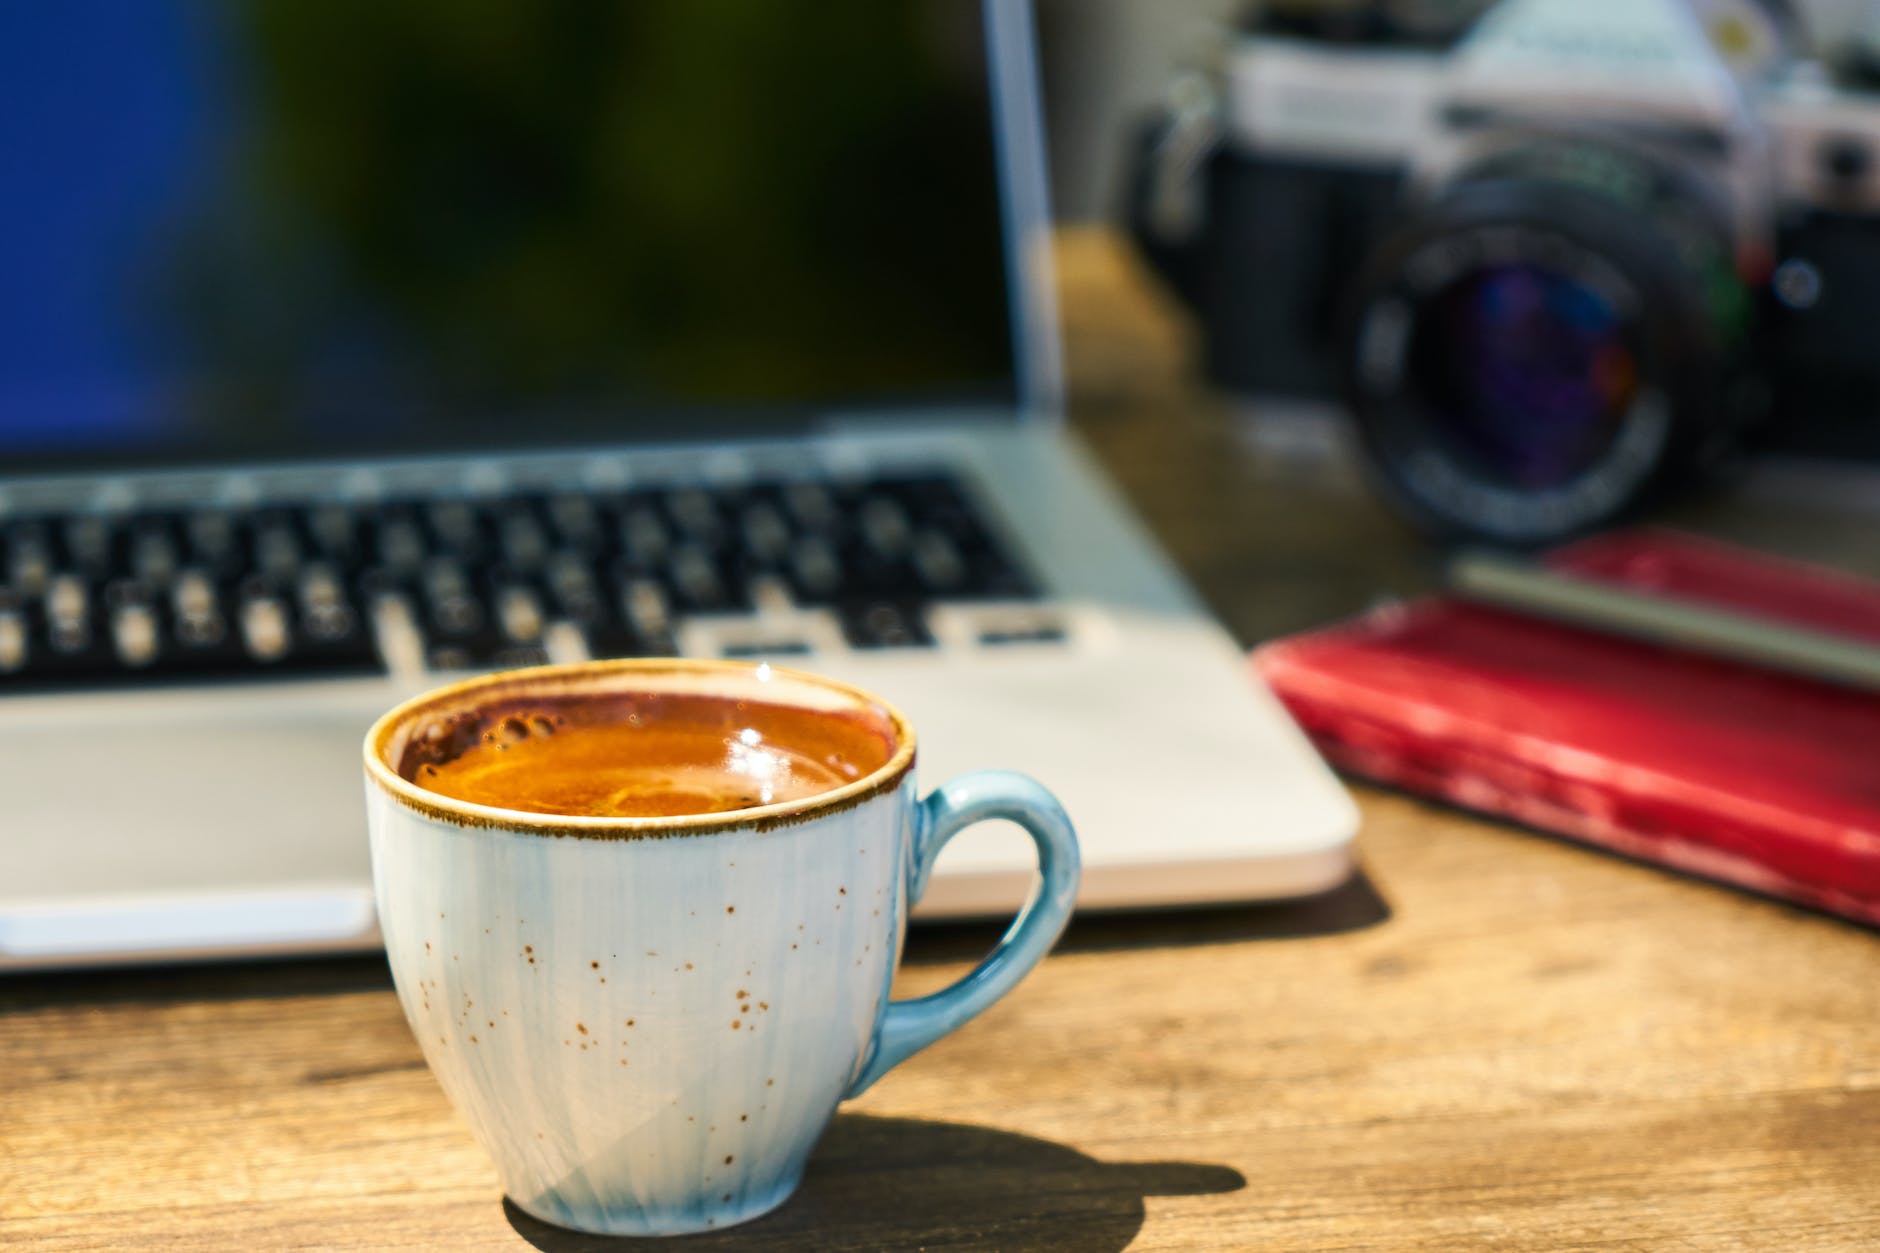 a cup of coffee and a camera on a wooden table in the workplace - virtual communities  